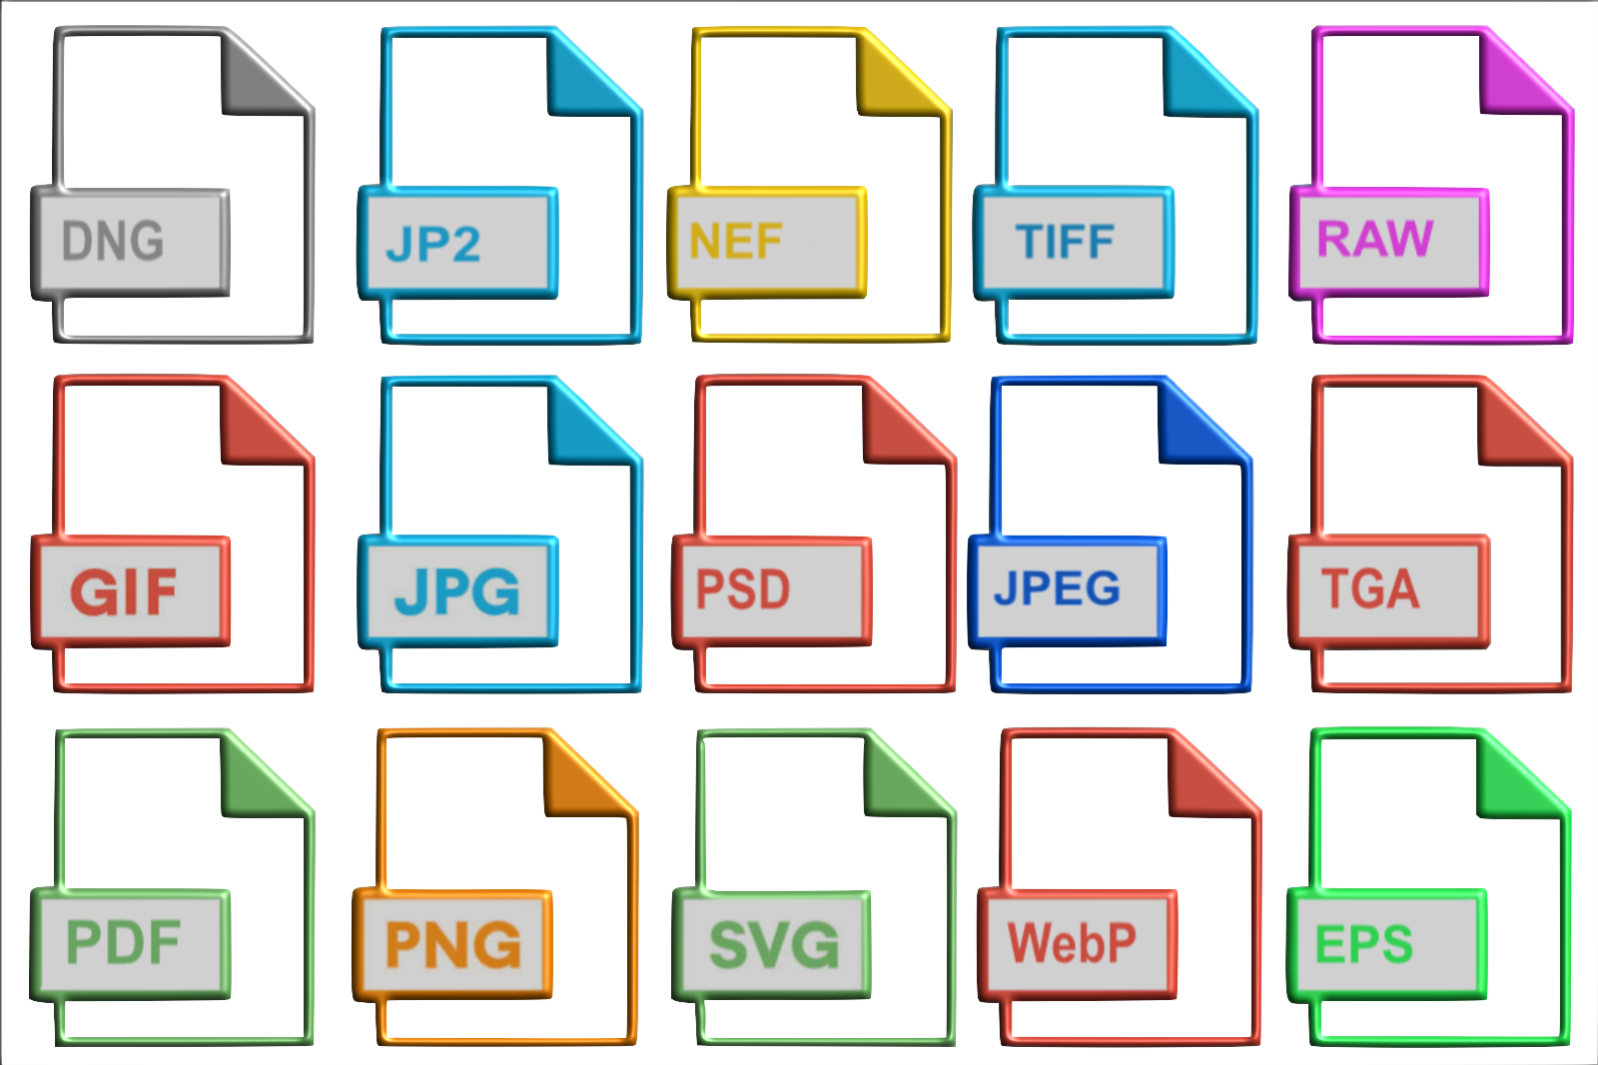 The different image formats